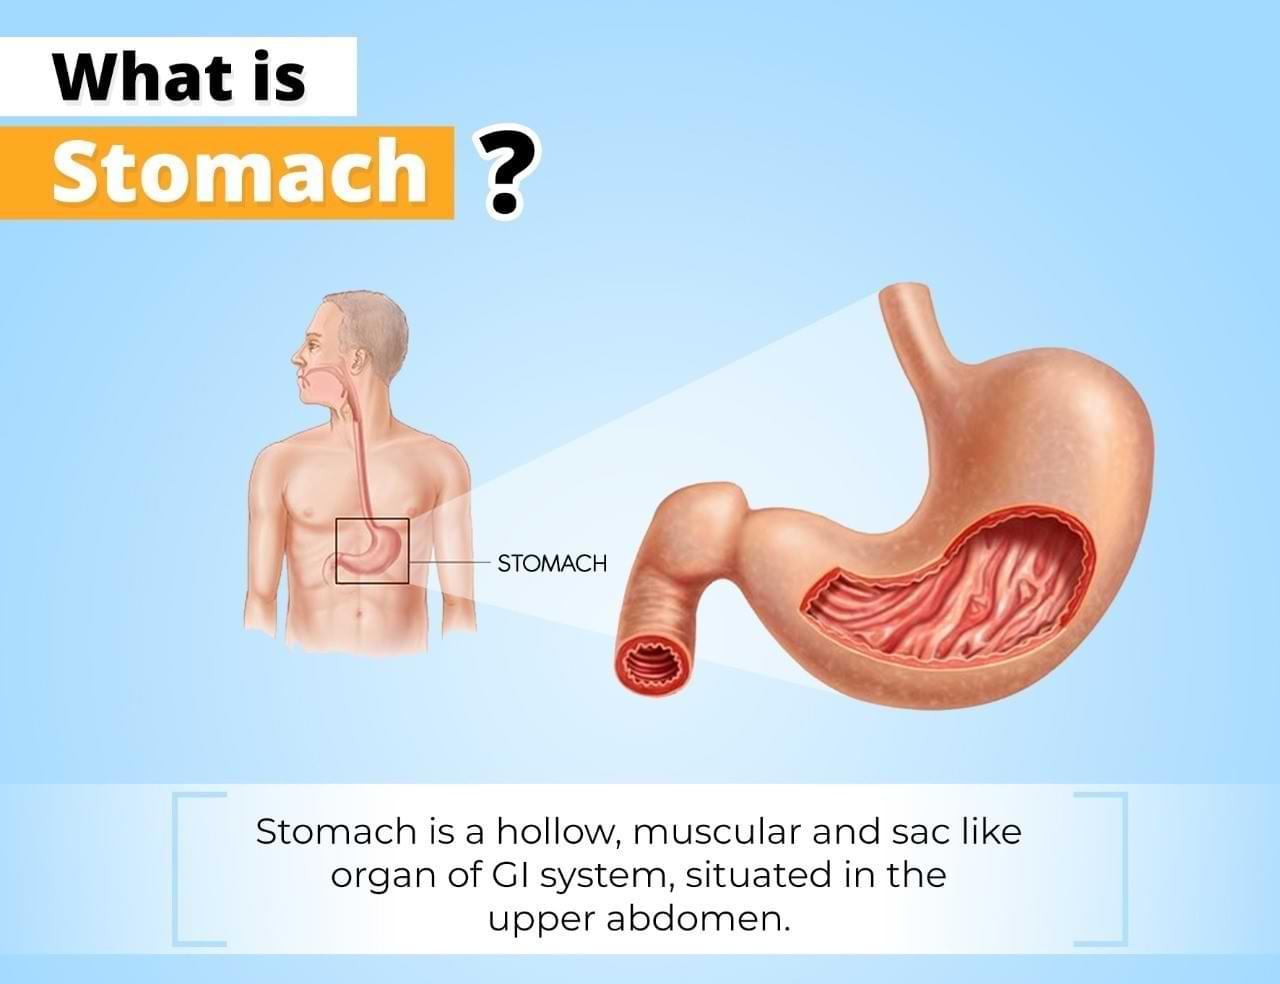 What is Stomach?